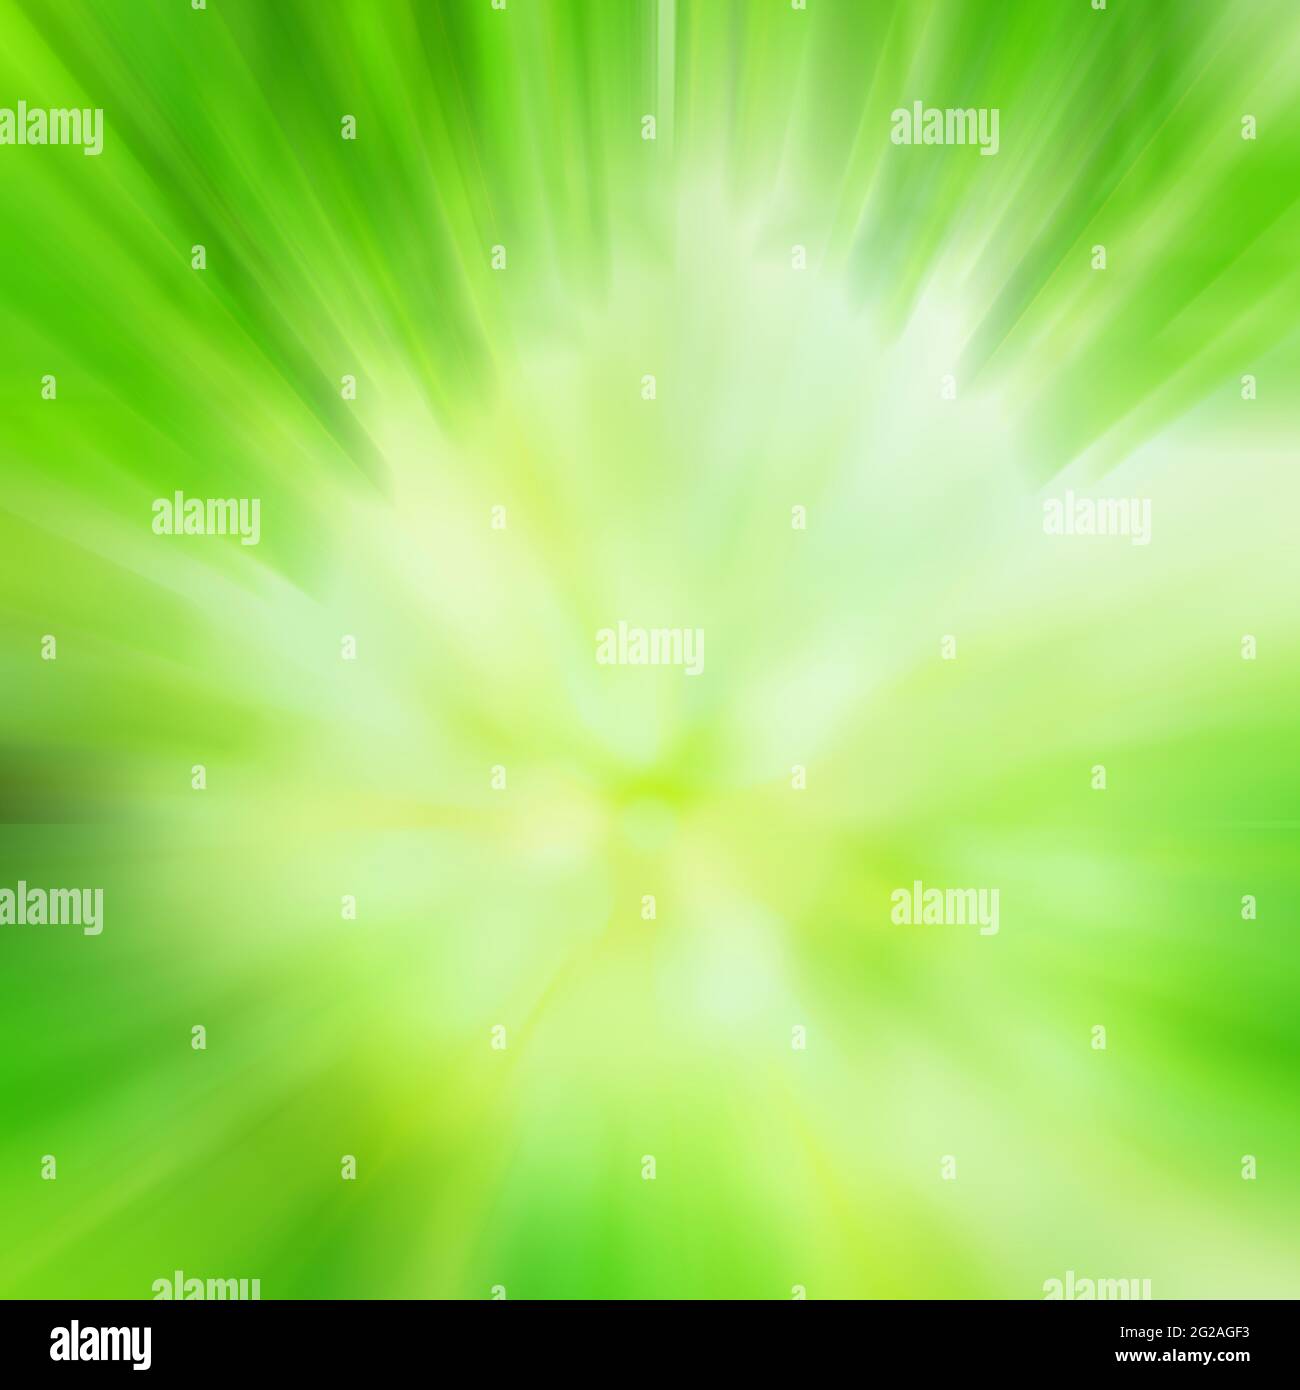 Green abstract background with motion blur effect Stock Photo